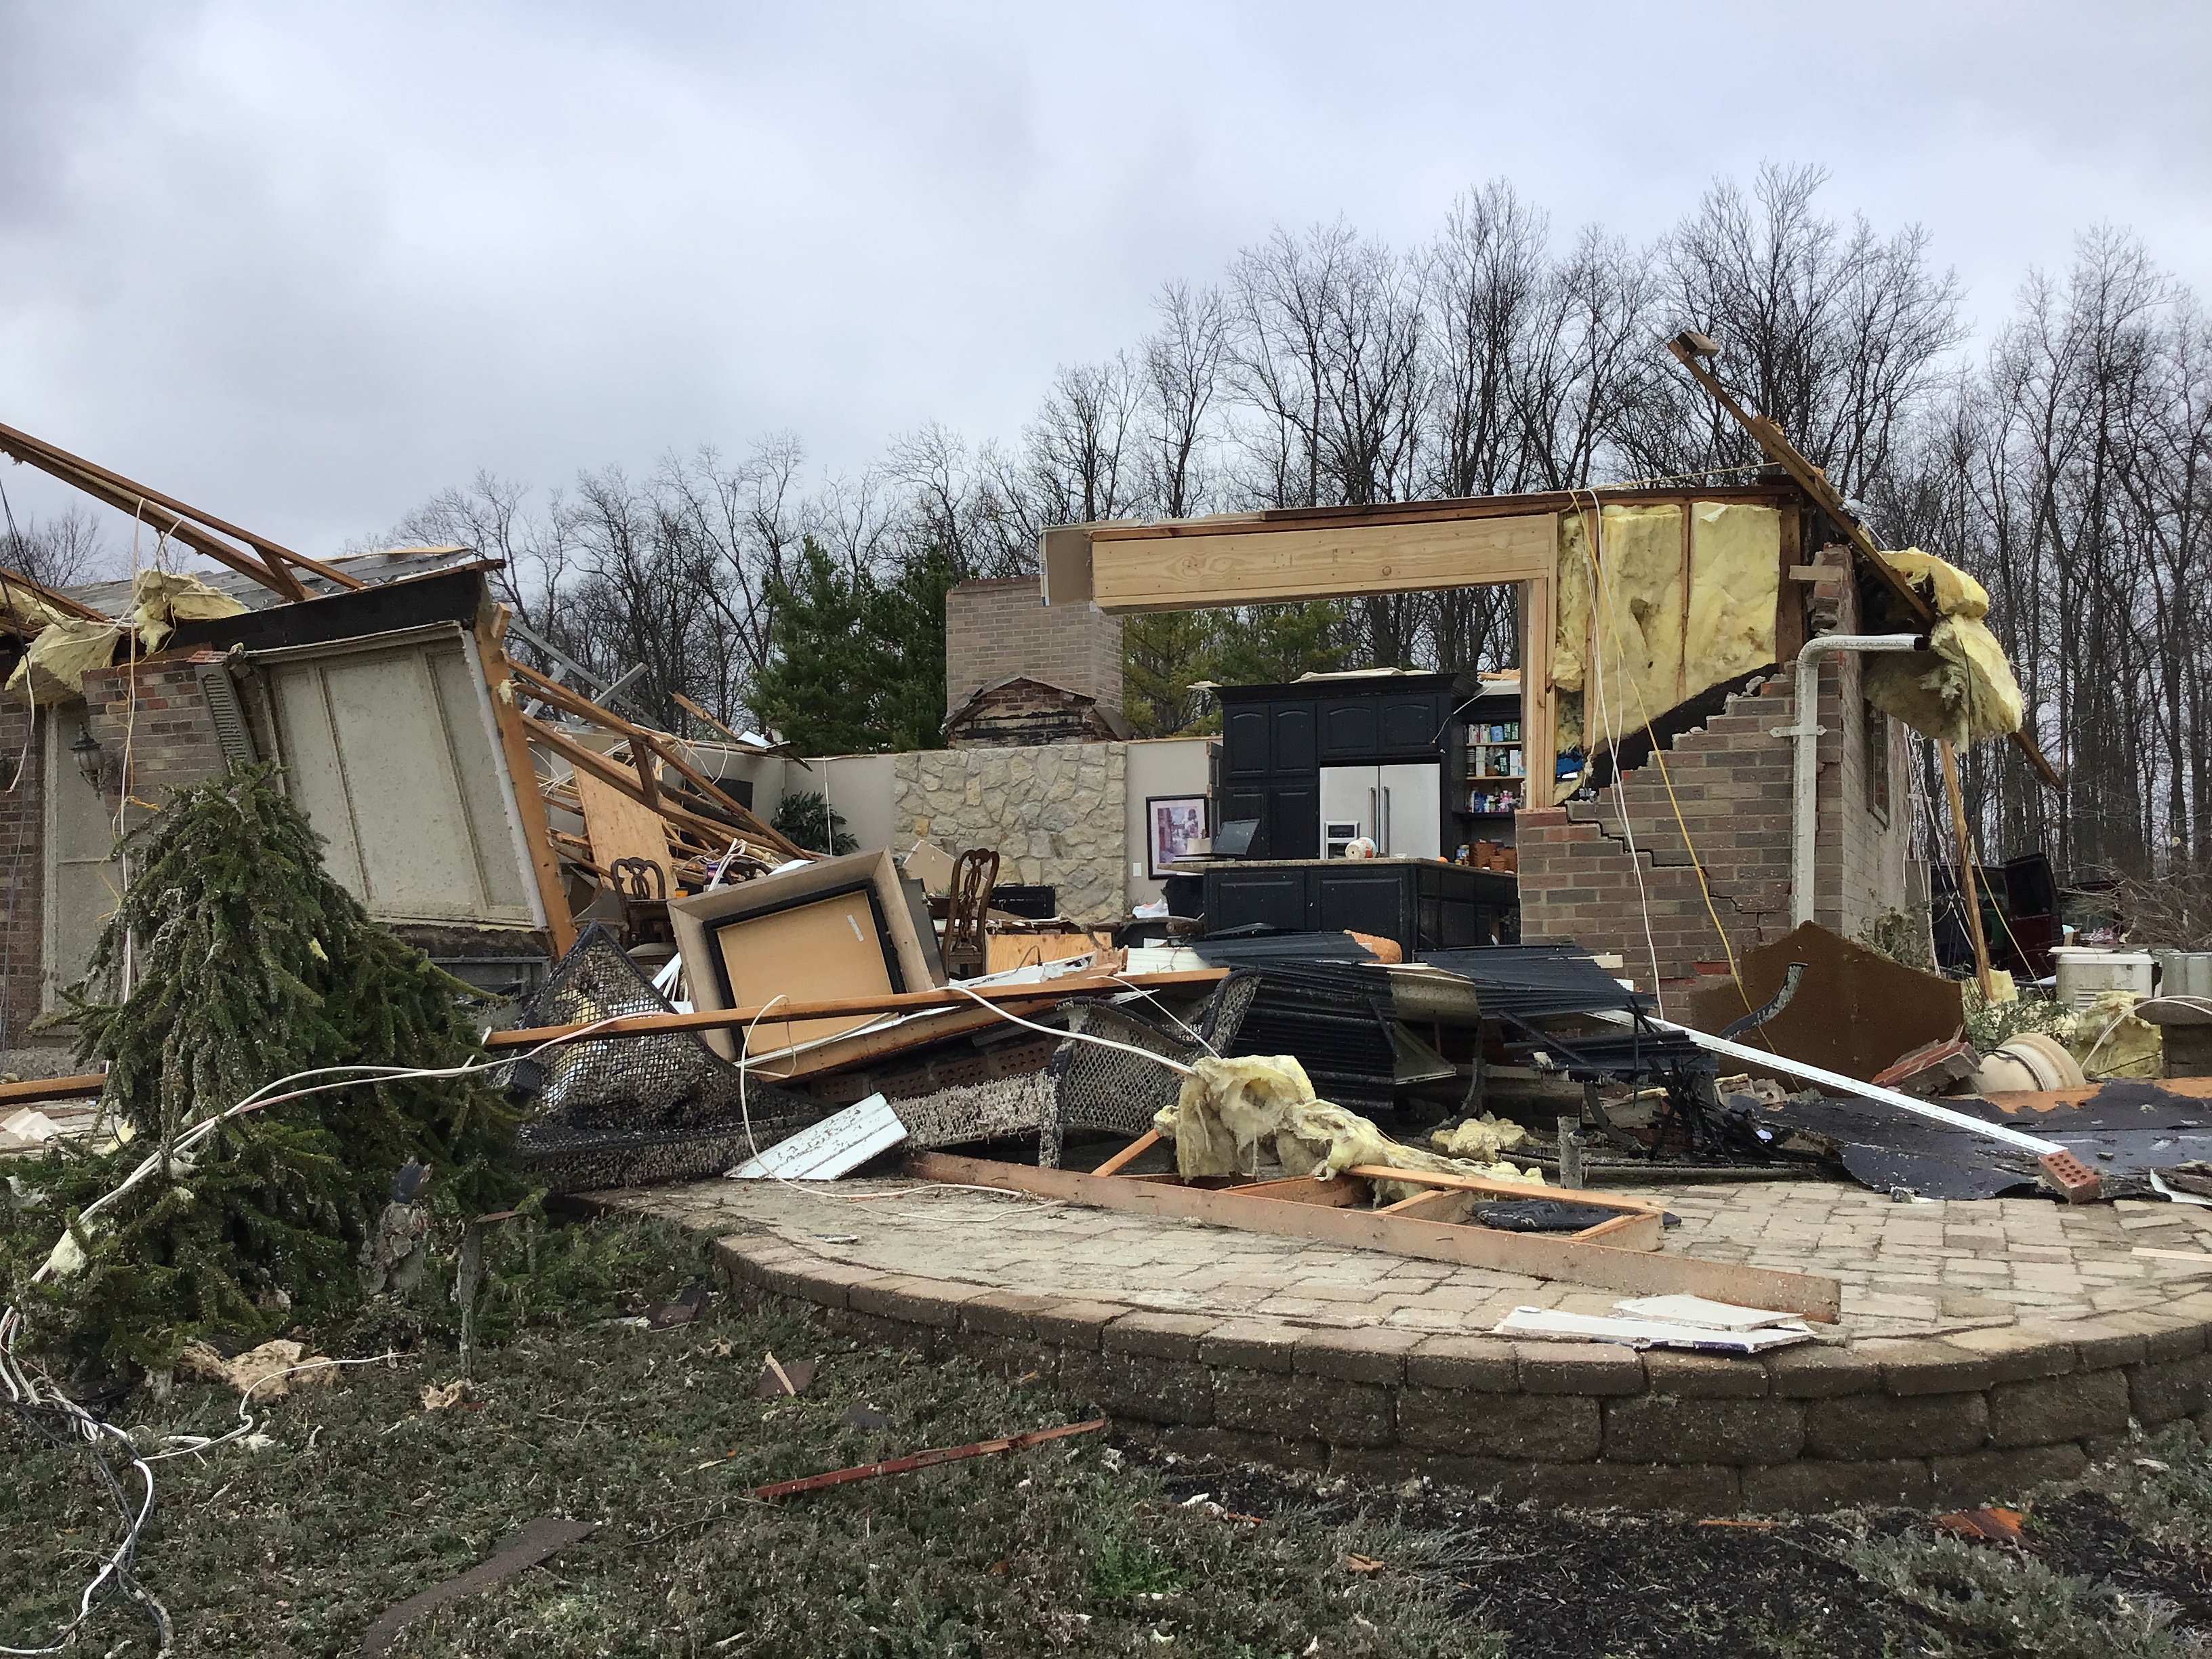 EF2 damage to a home in Newberry Township, Ohio.